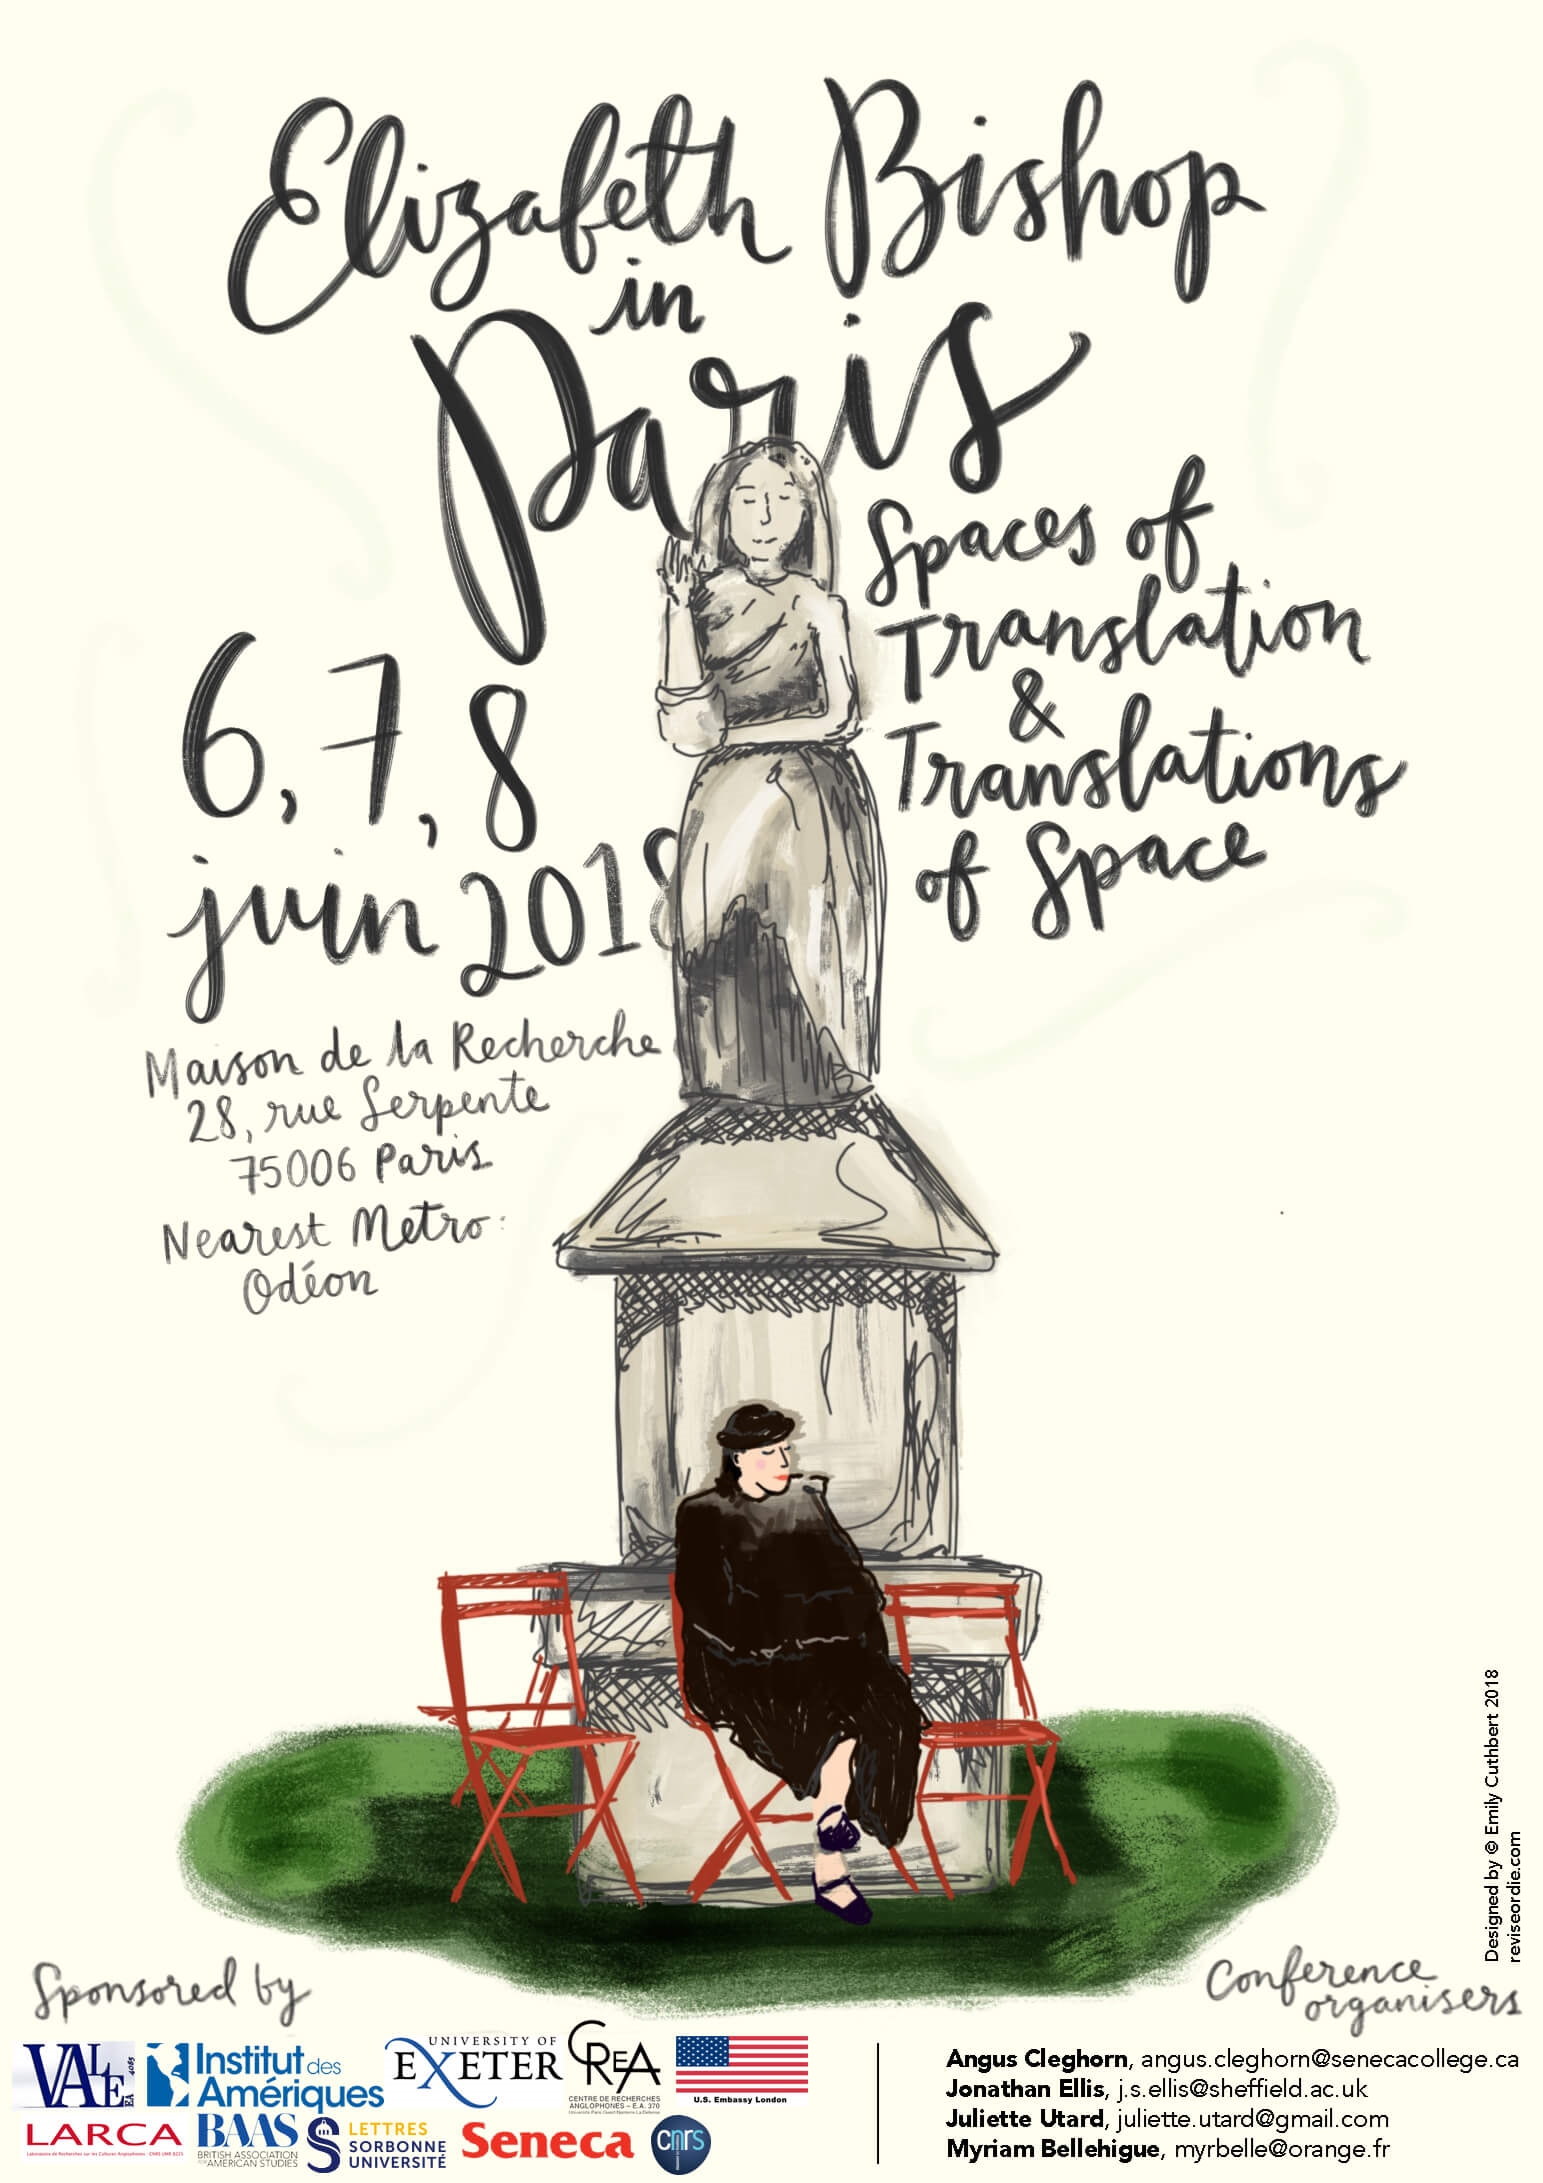 The poster for the Elizabeth Bishop in Paris conference